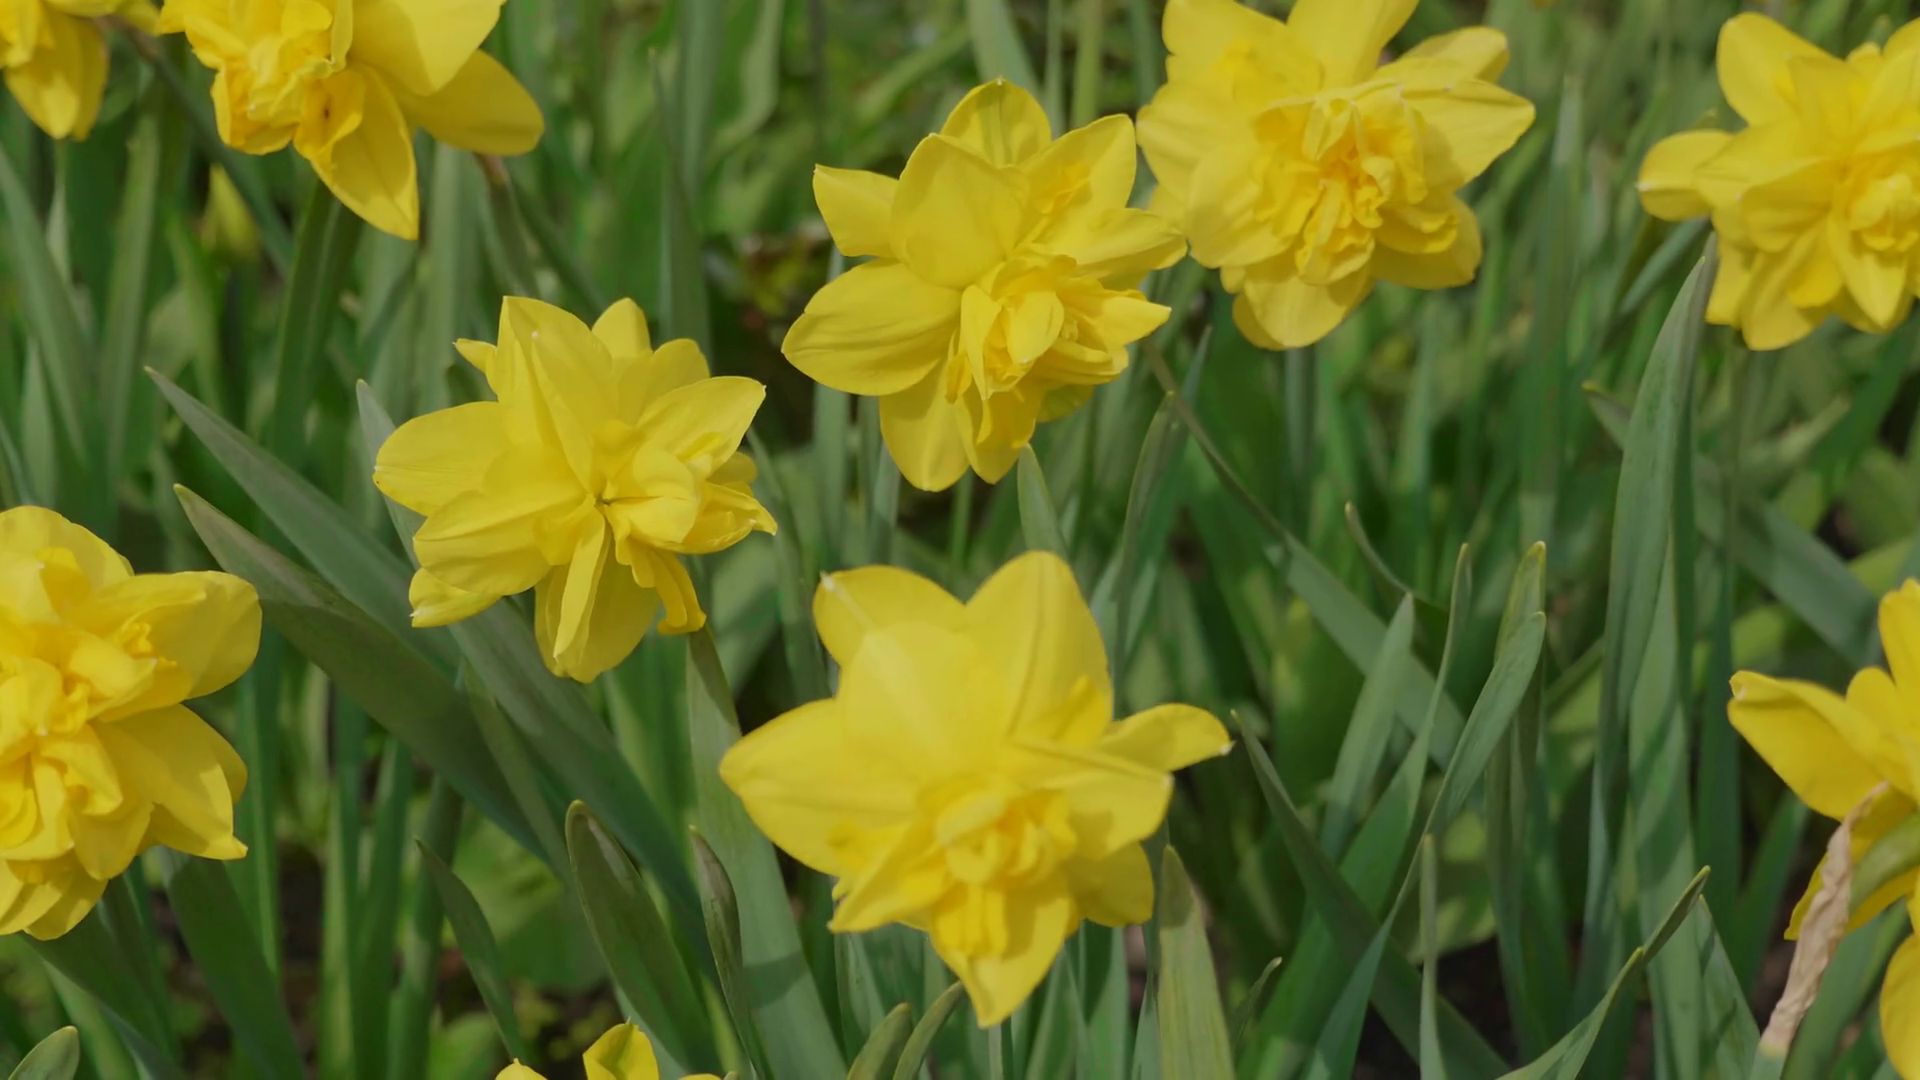 Close up of yellow daffodils (narcissus) flowering in spring ...